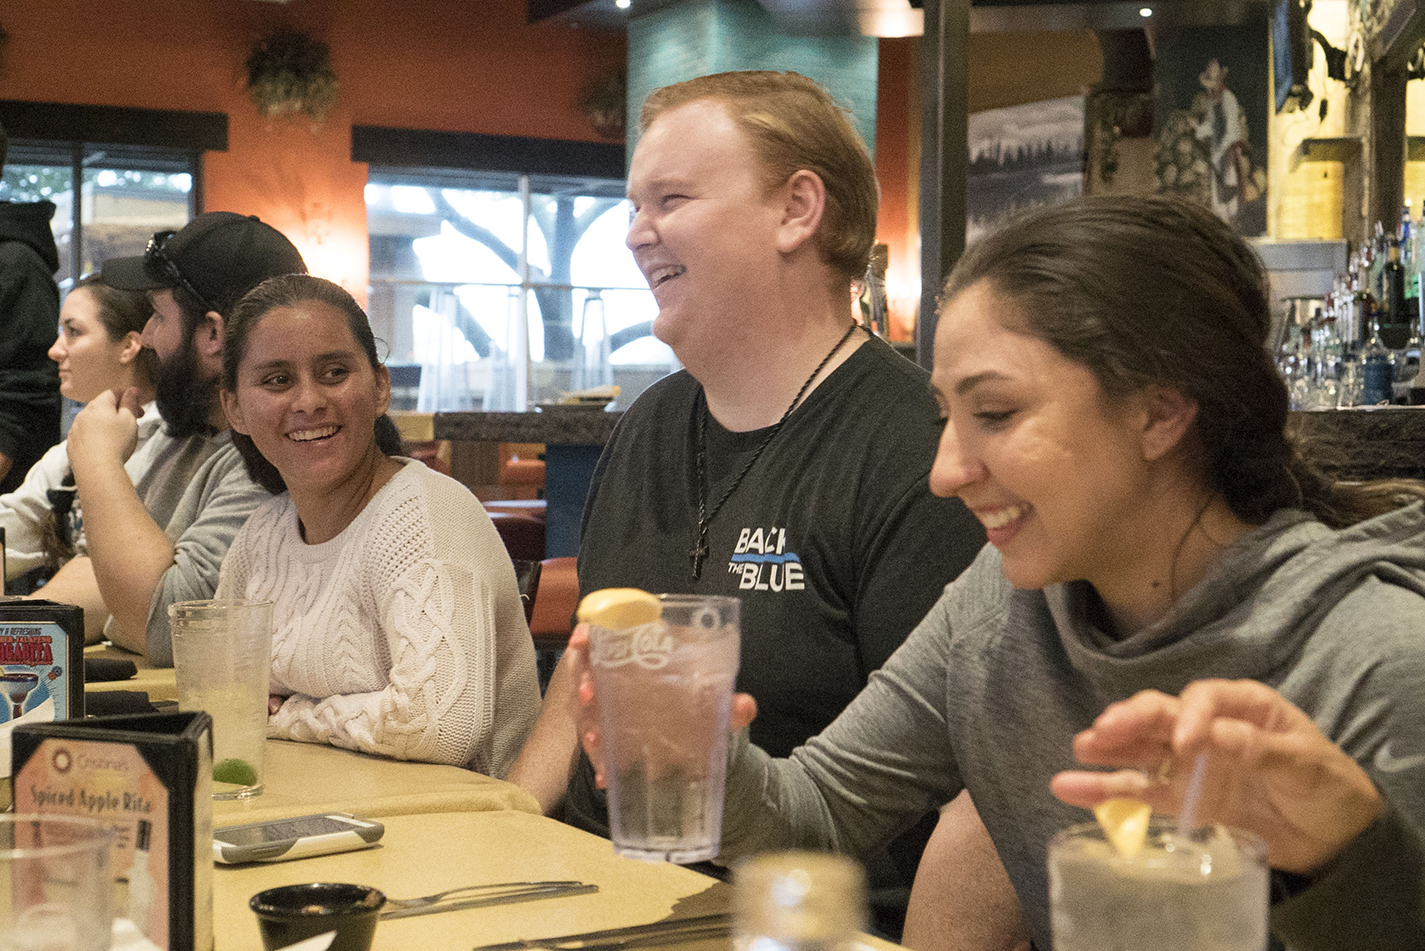 NE students attended the monthly sobremesa at Cristina’s in North Richland Hills Nov. 9. They can develop their Spanish-speaking skills and earn extra credit for attending.